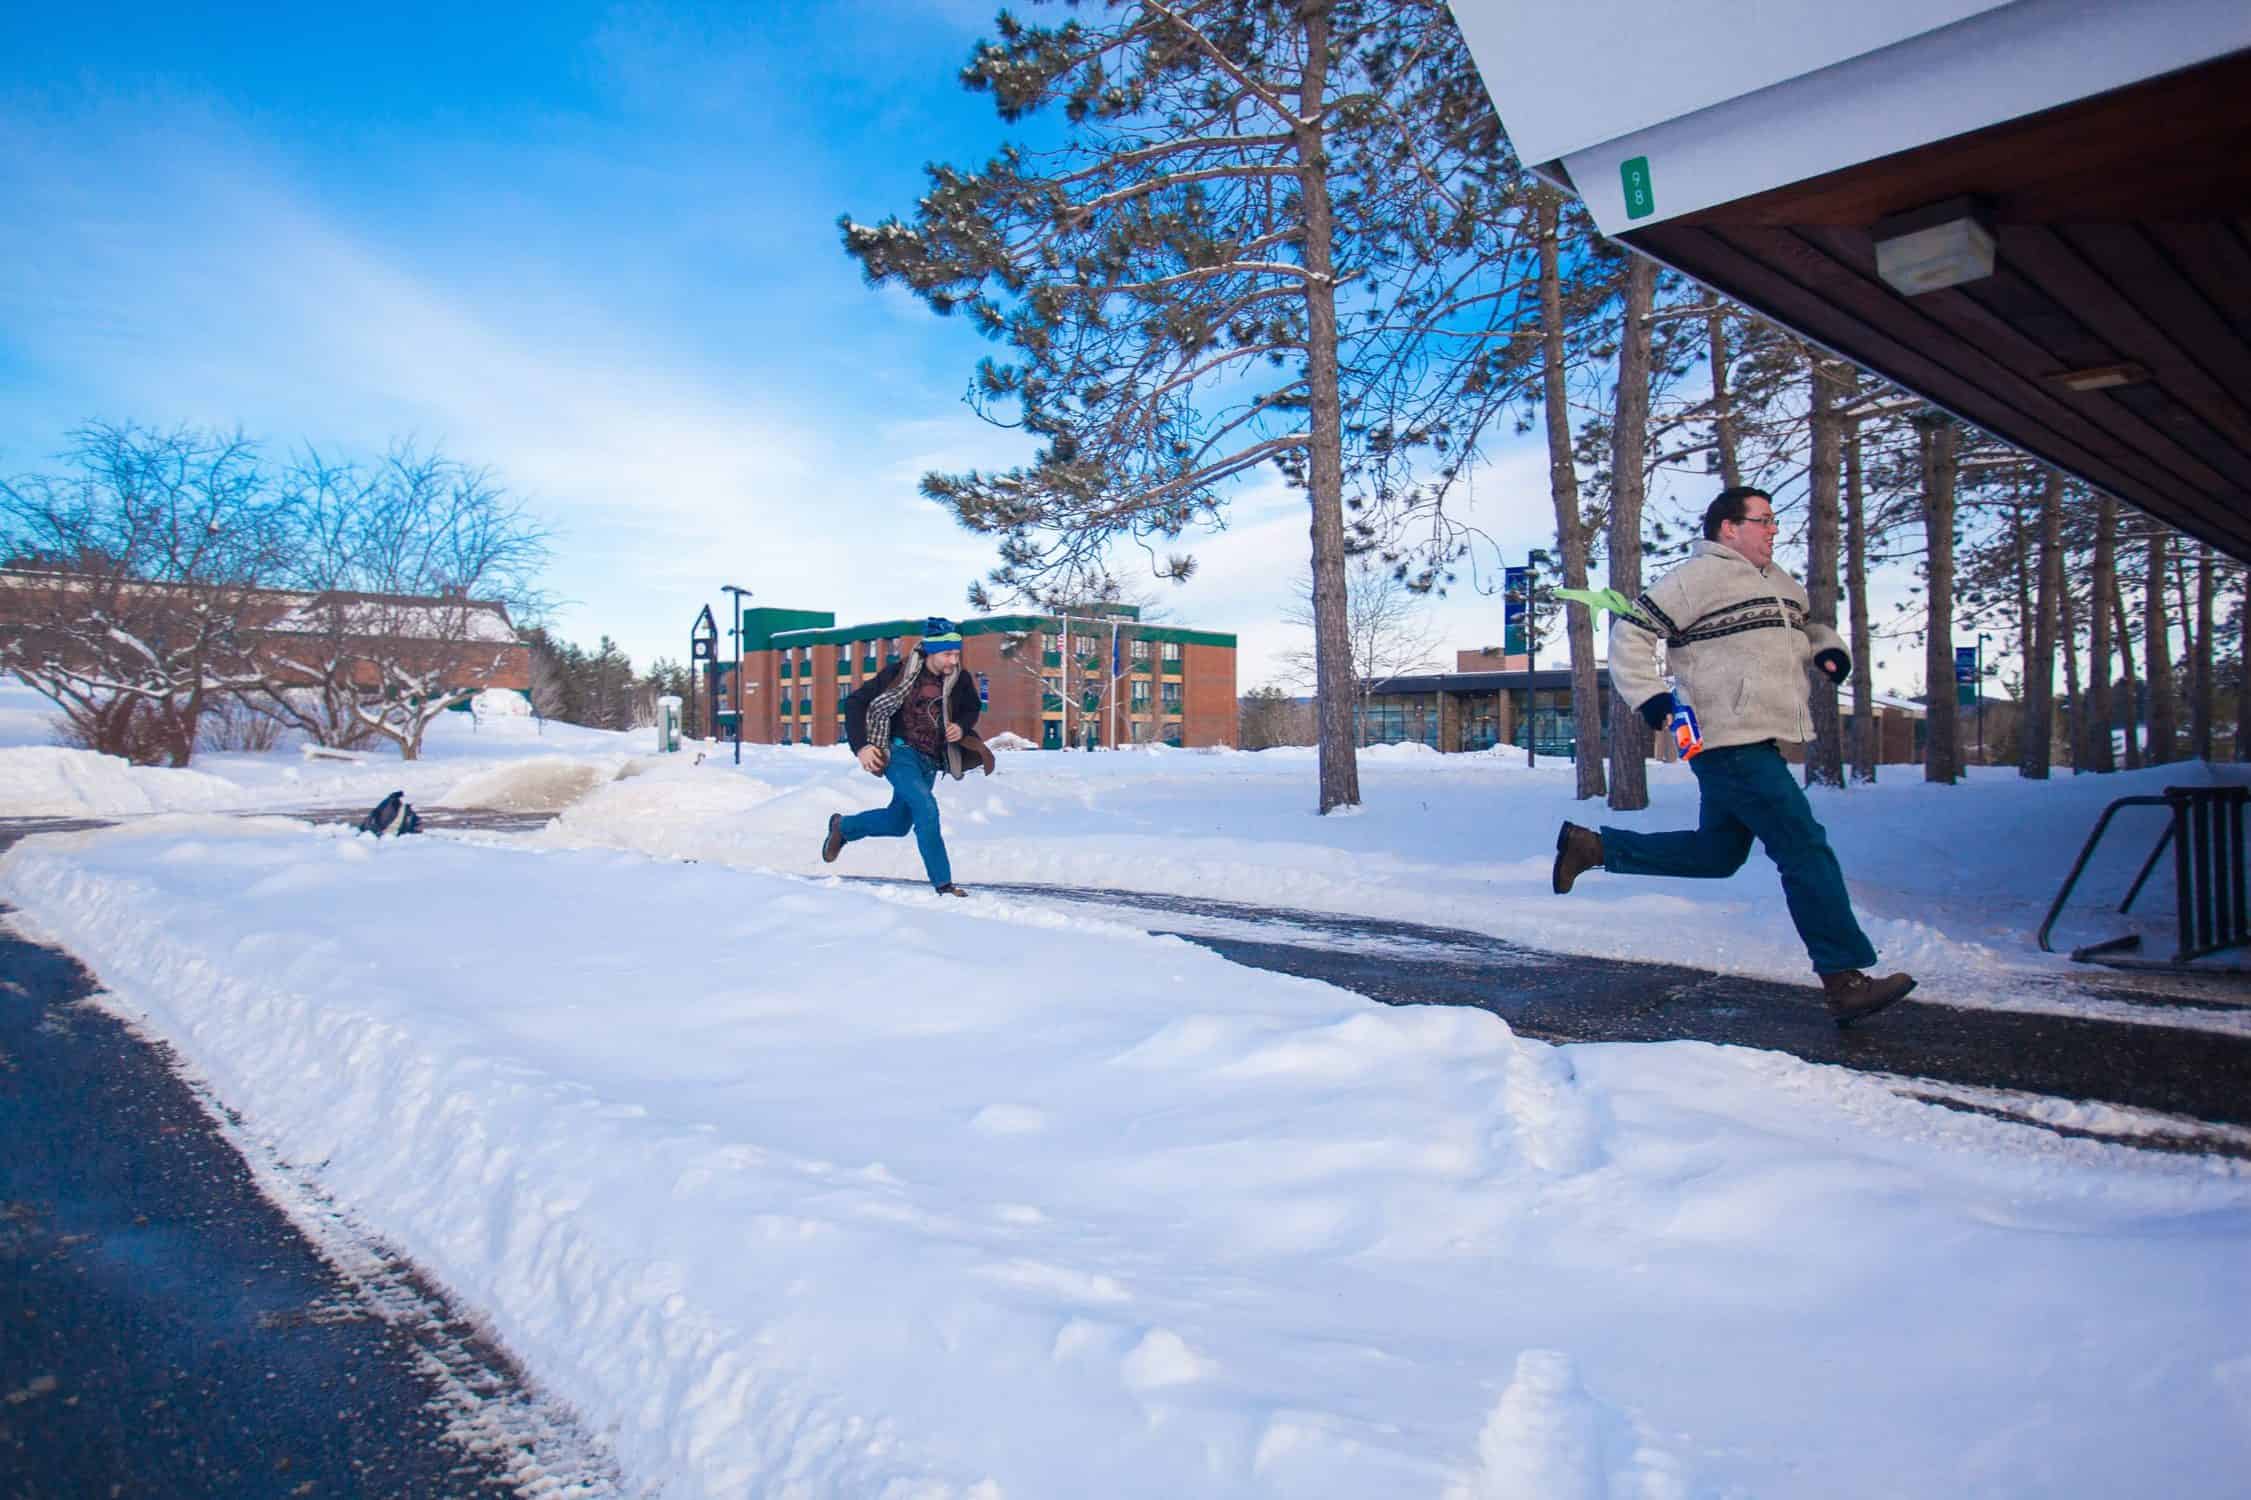 Students chase each other in the snow